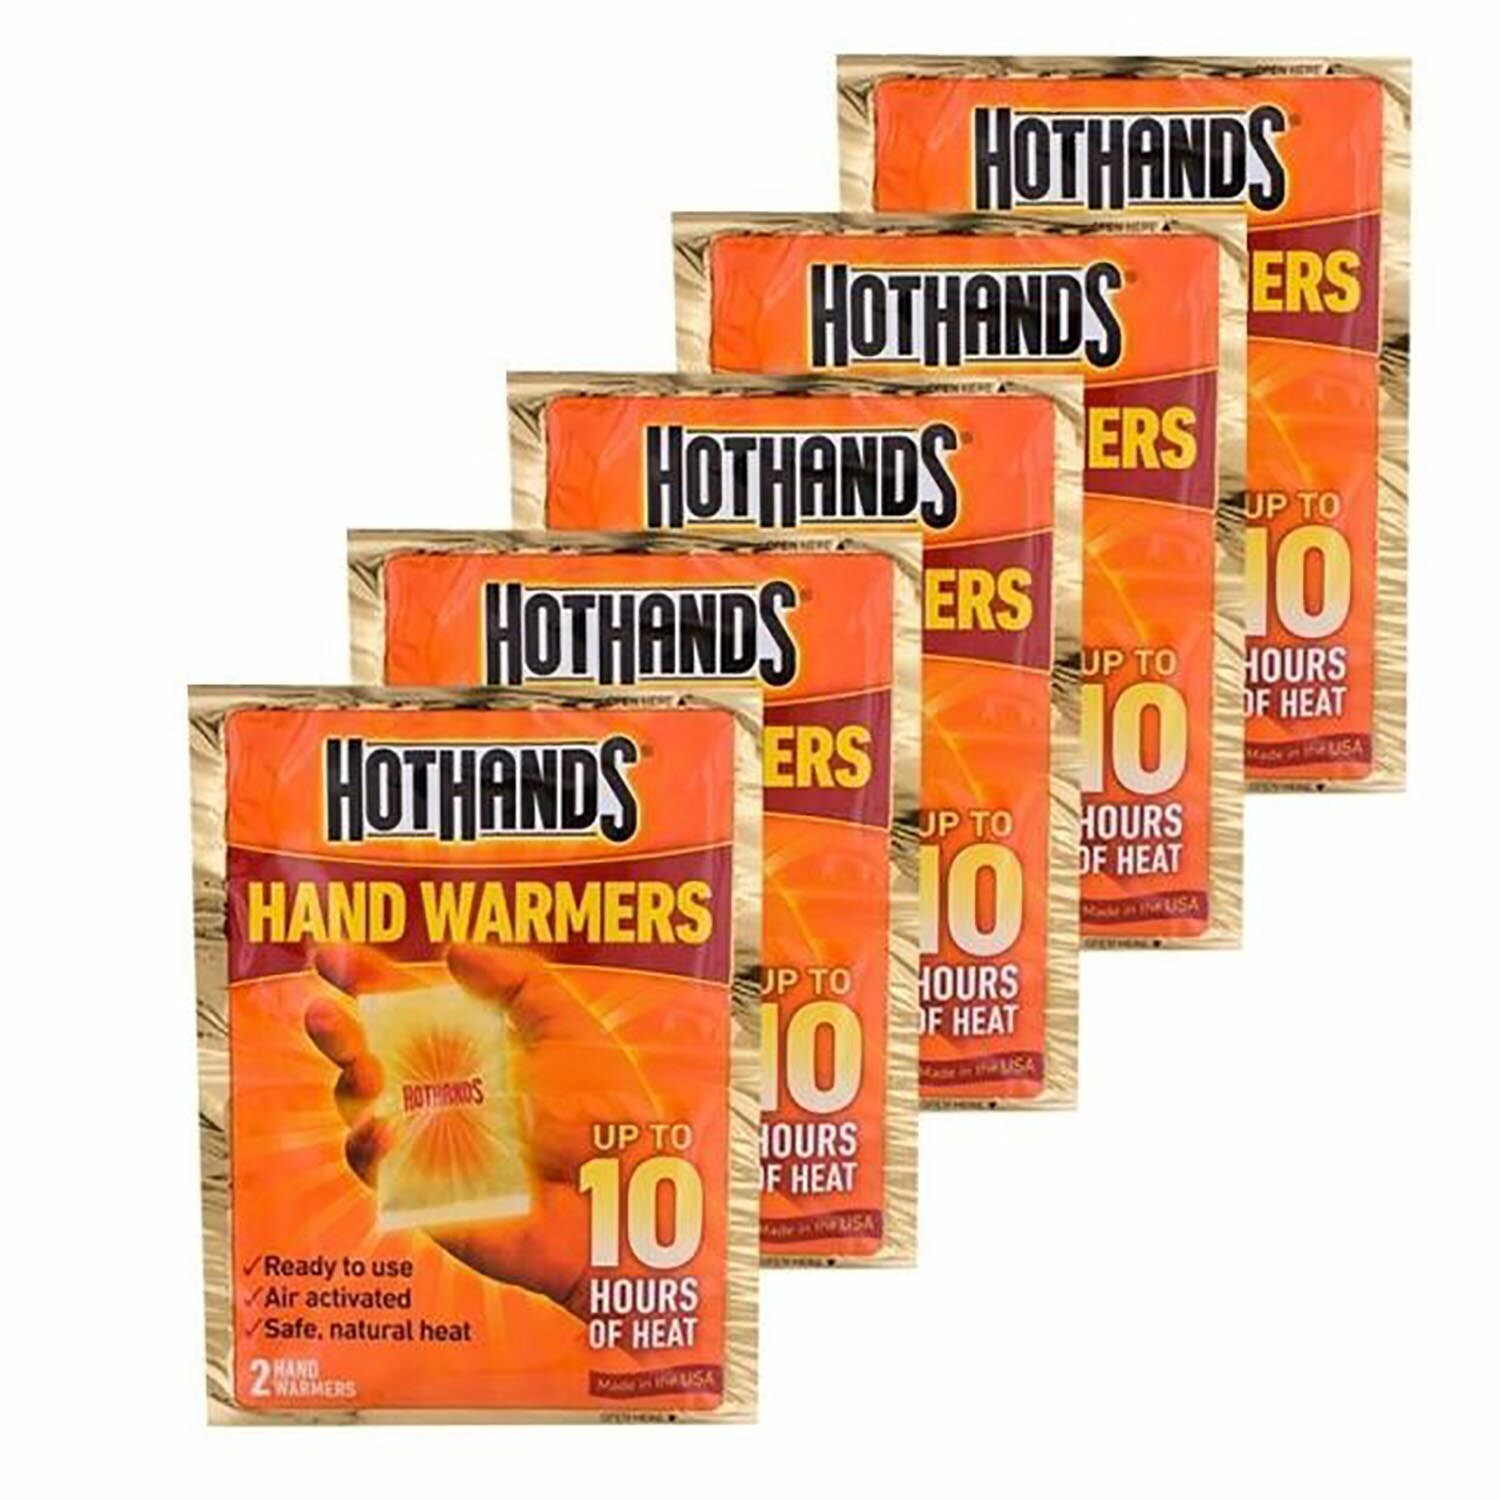 HotHands Hand Warmer Image 3